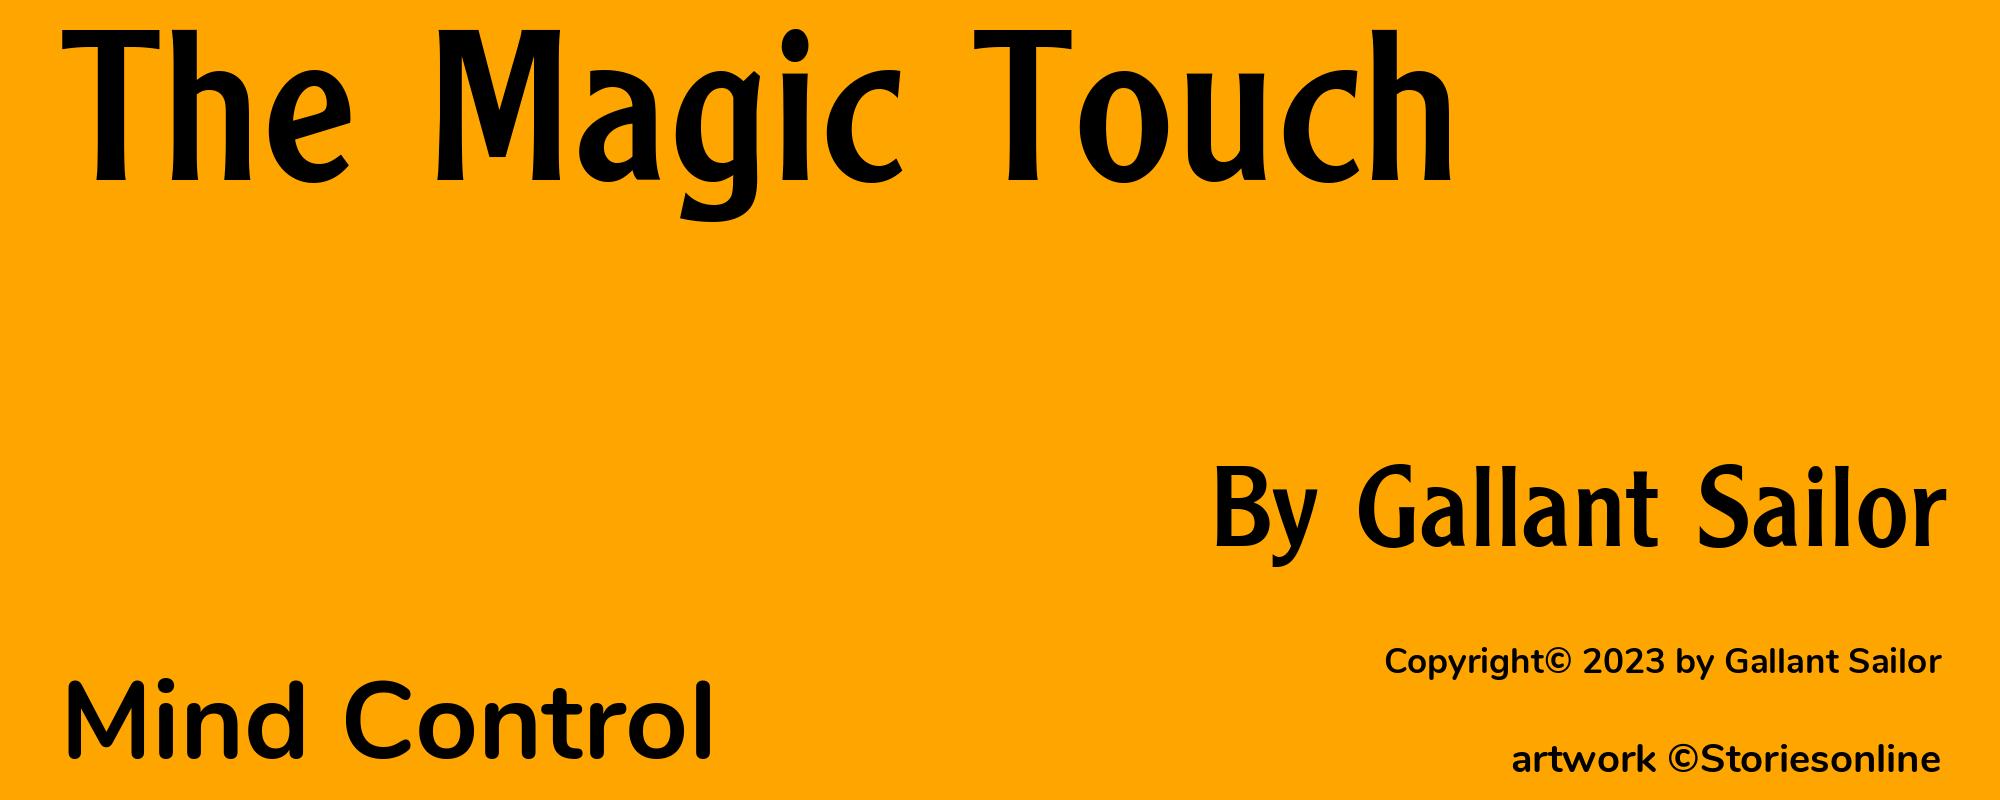 The Magic Touch - Cover